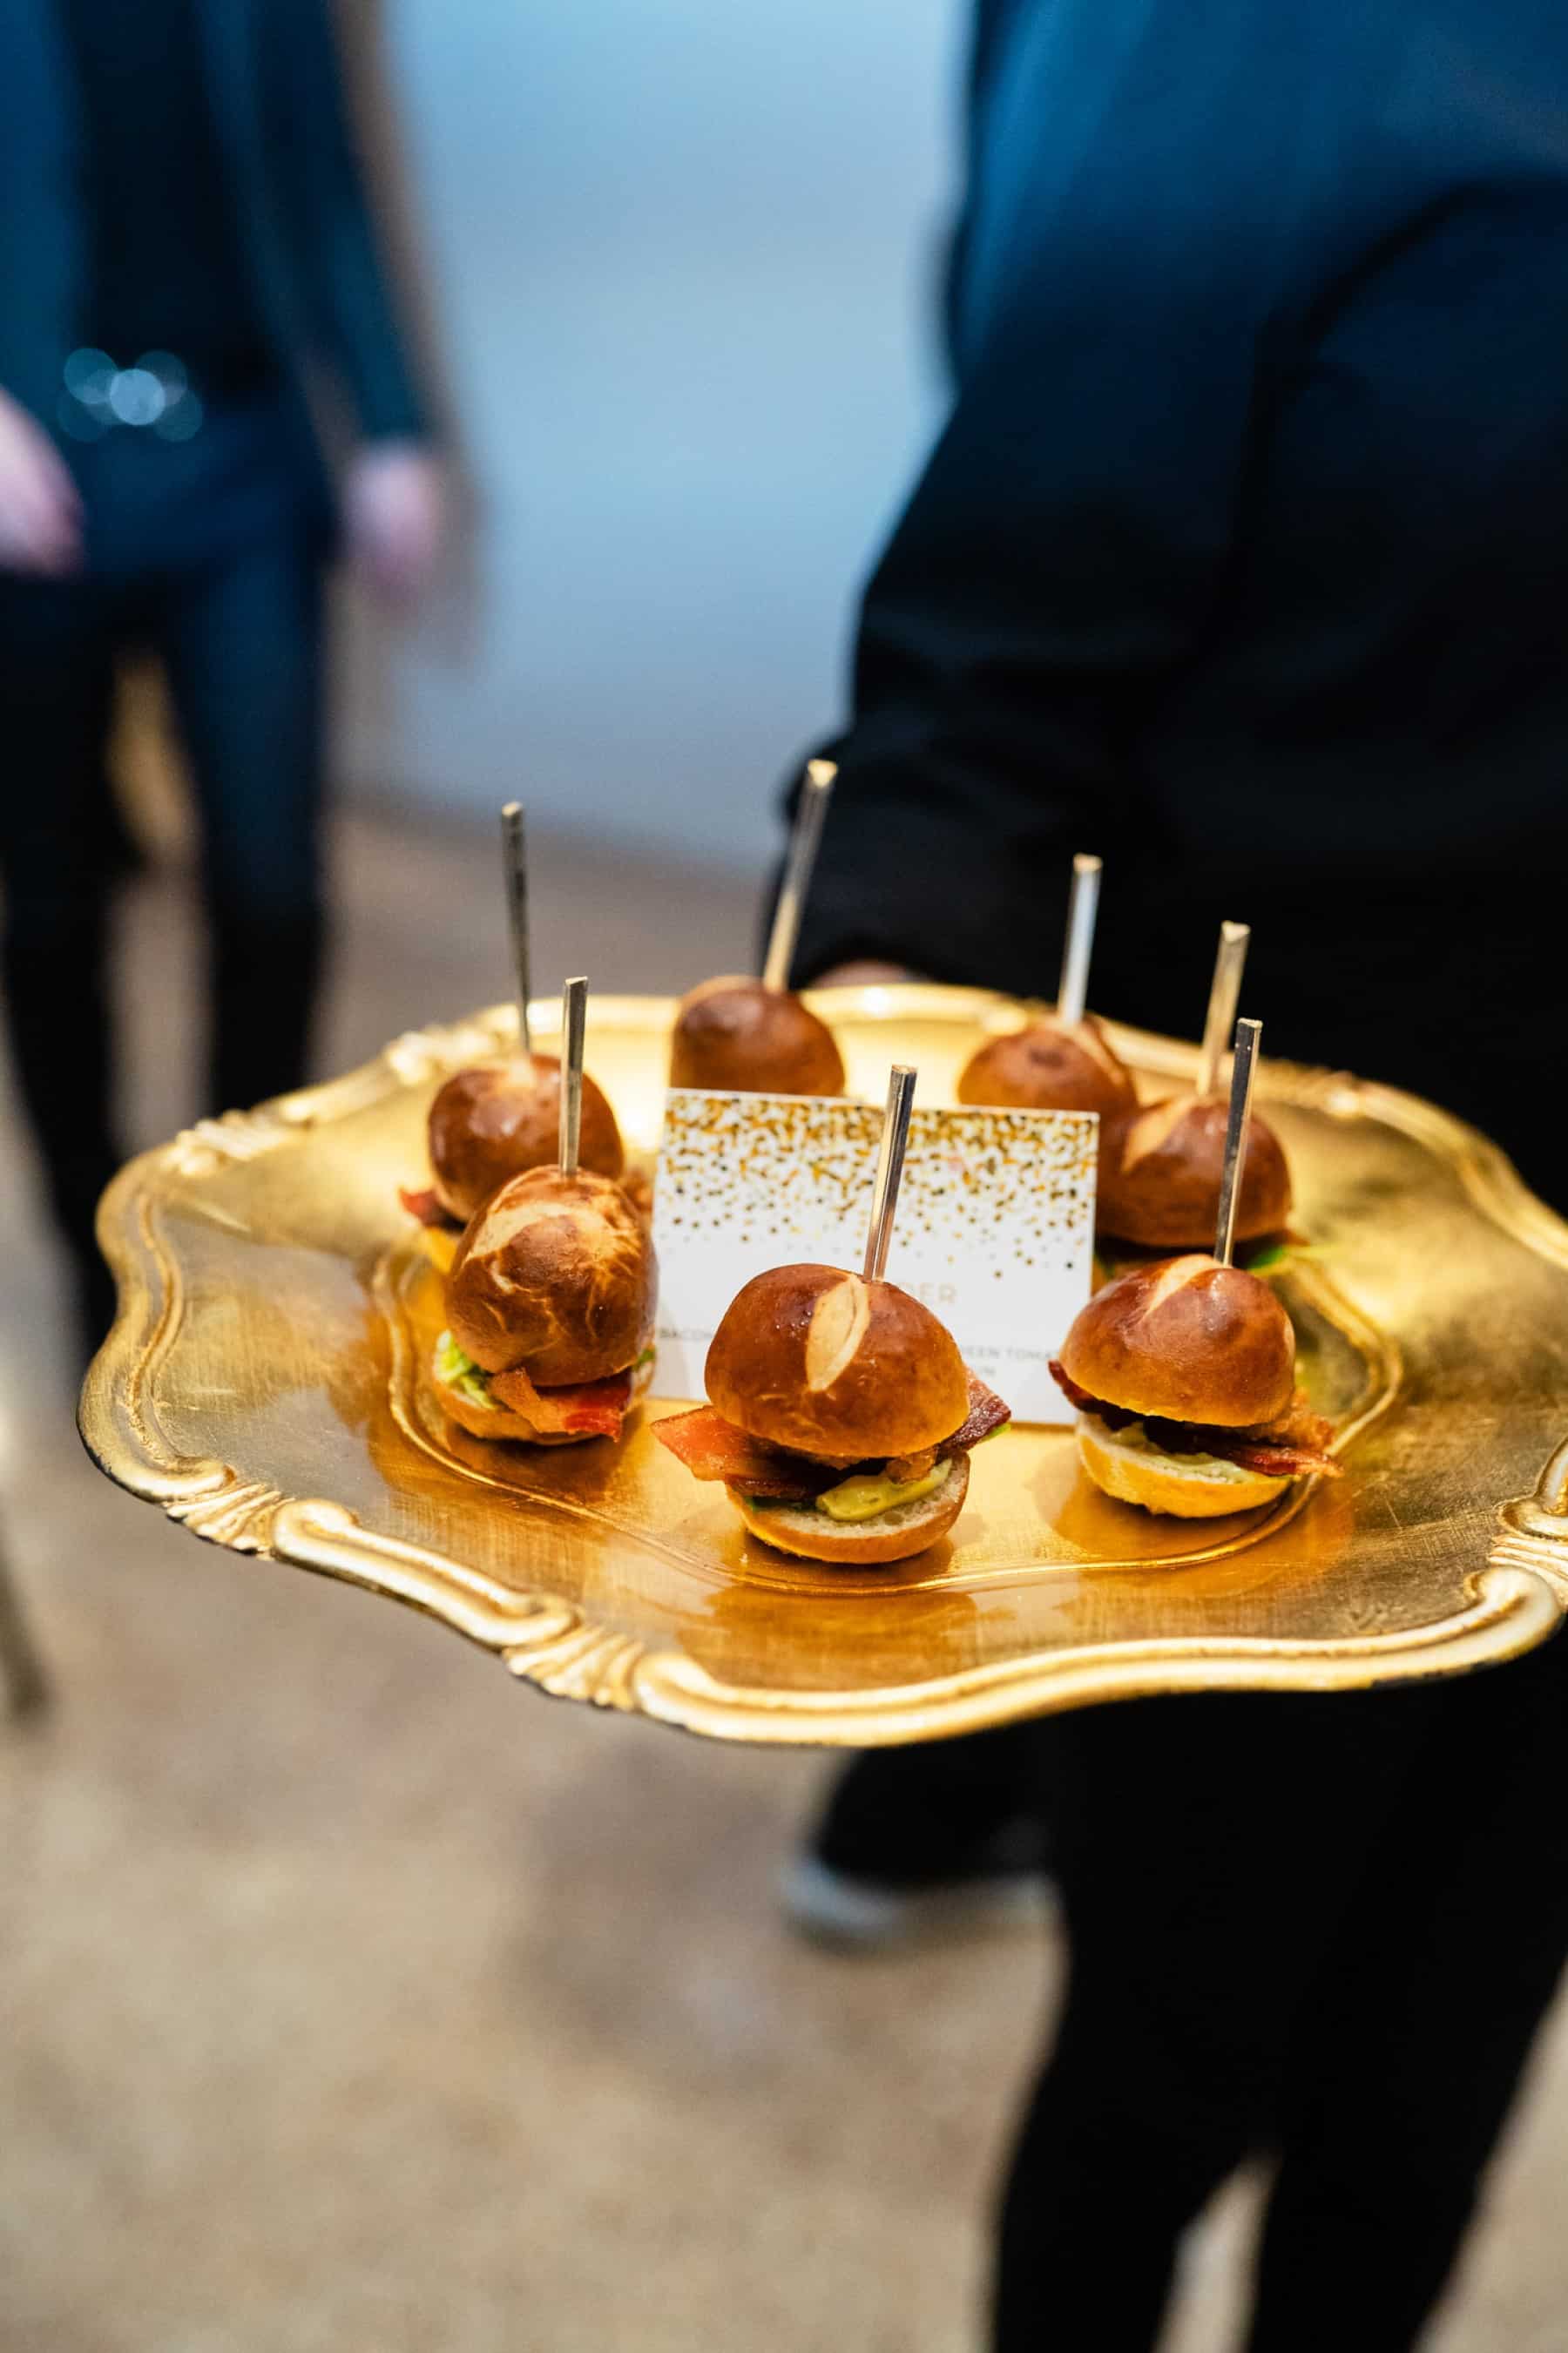 Great Gatsby Holiday Party | Austin | Crave Catering